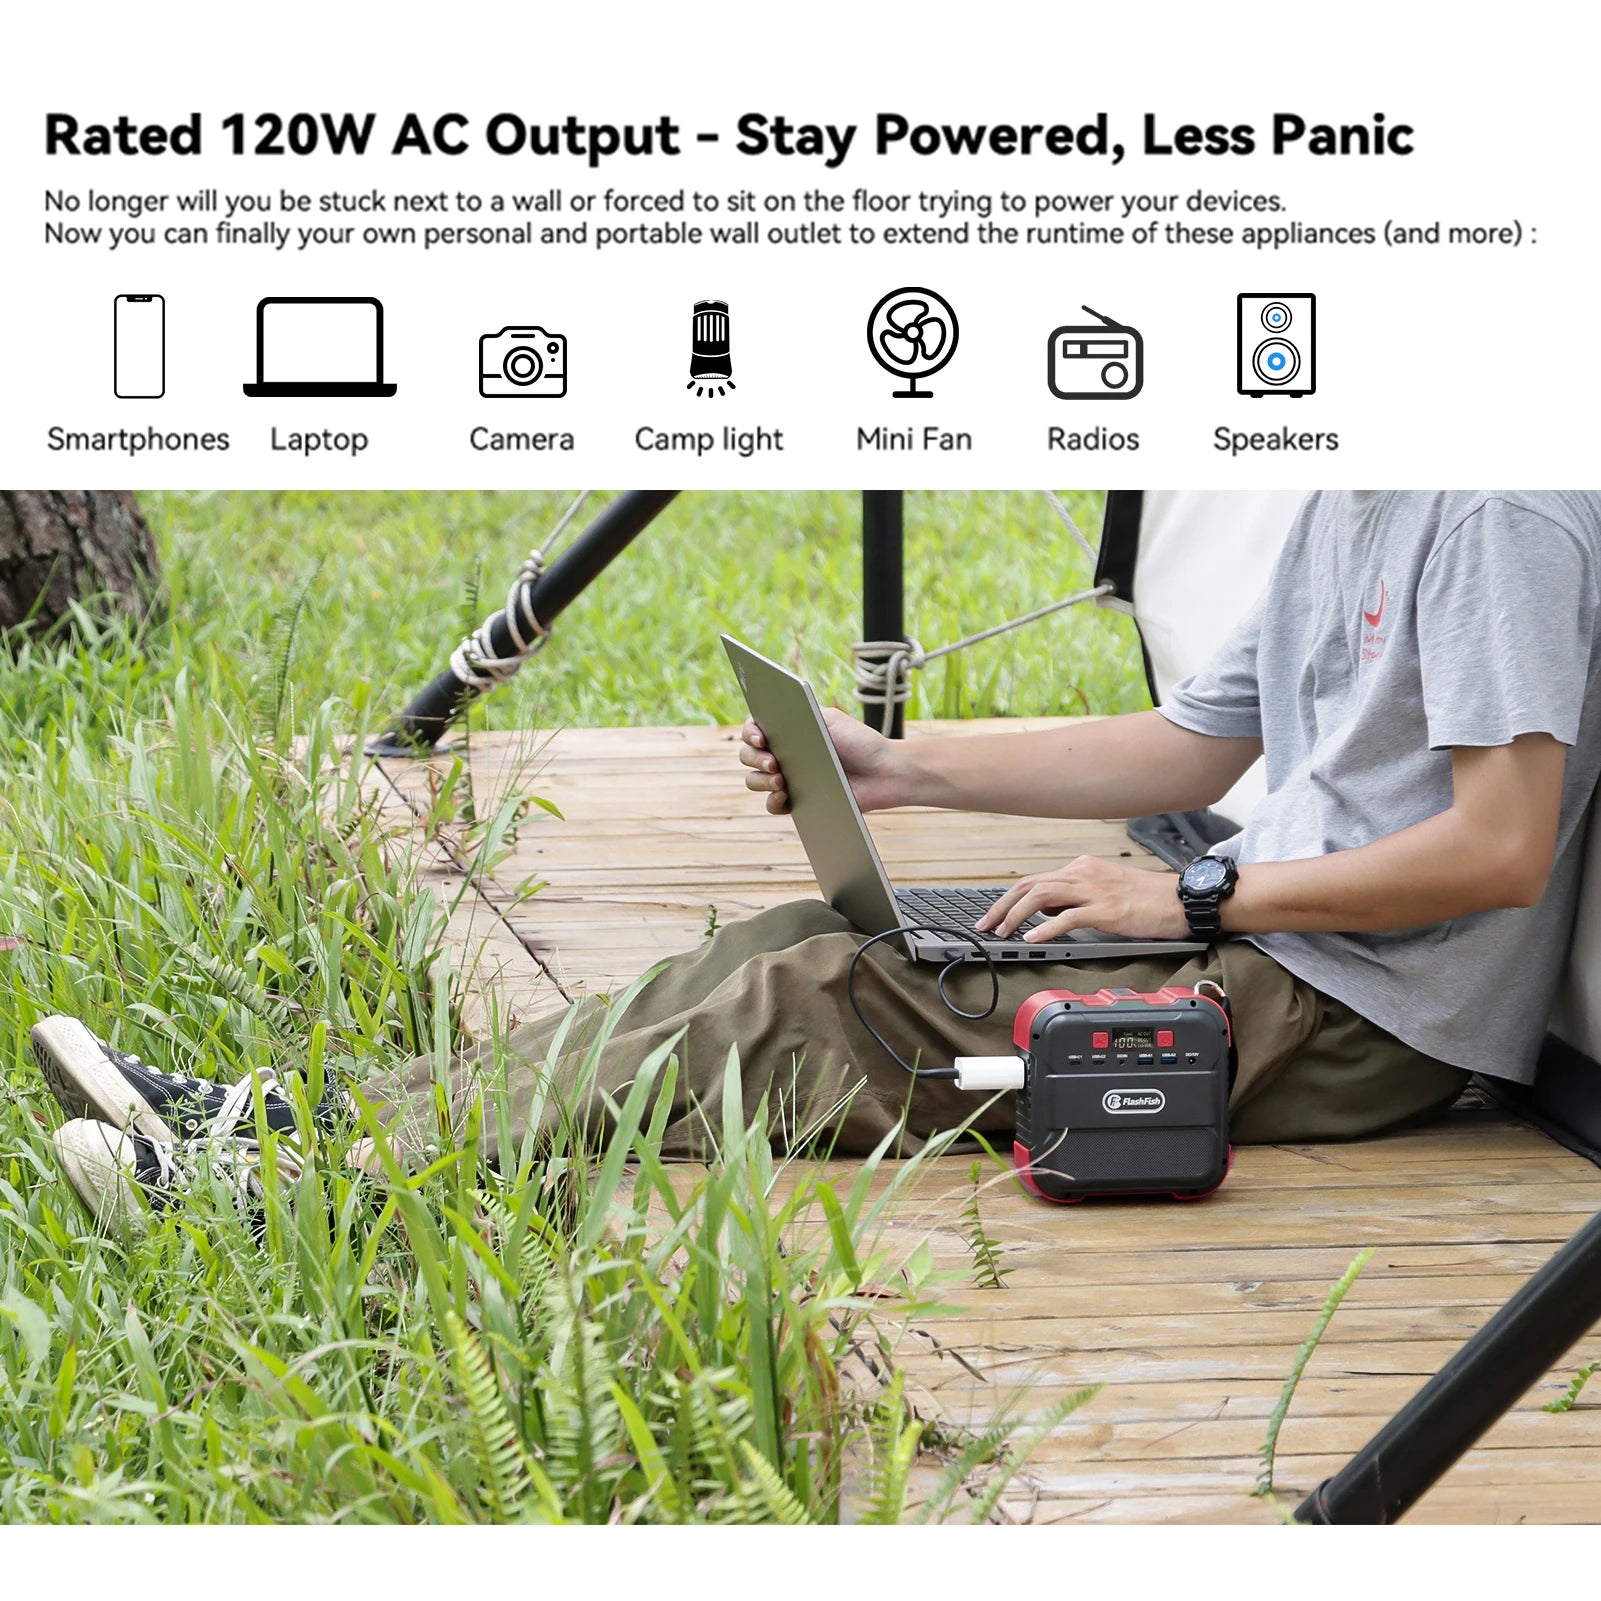 GOFORT A101G Portable Power Station 120W - Inverted Powers